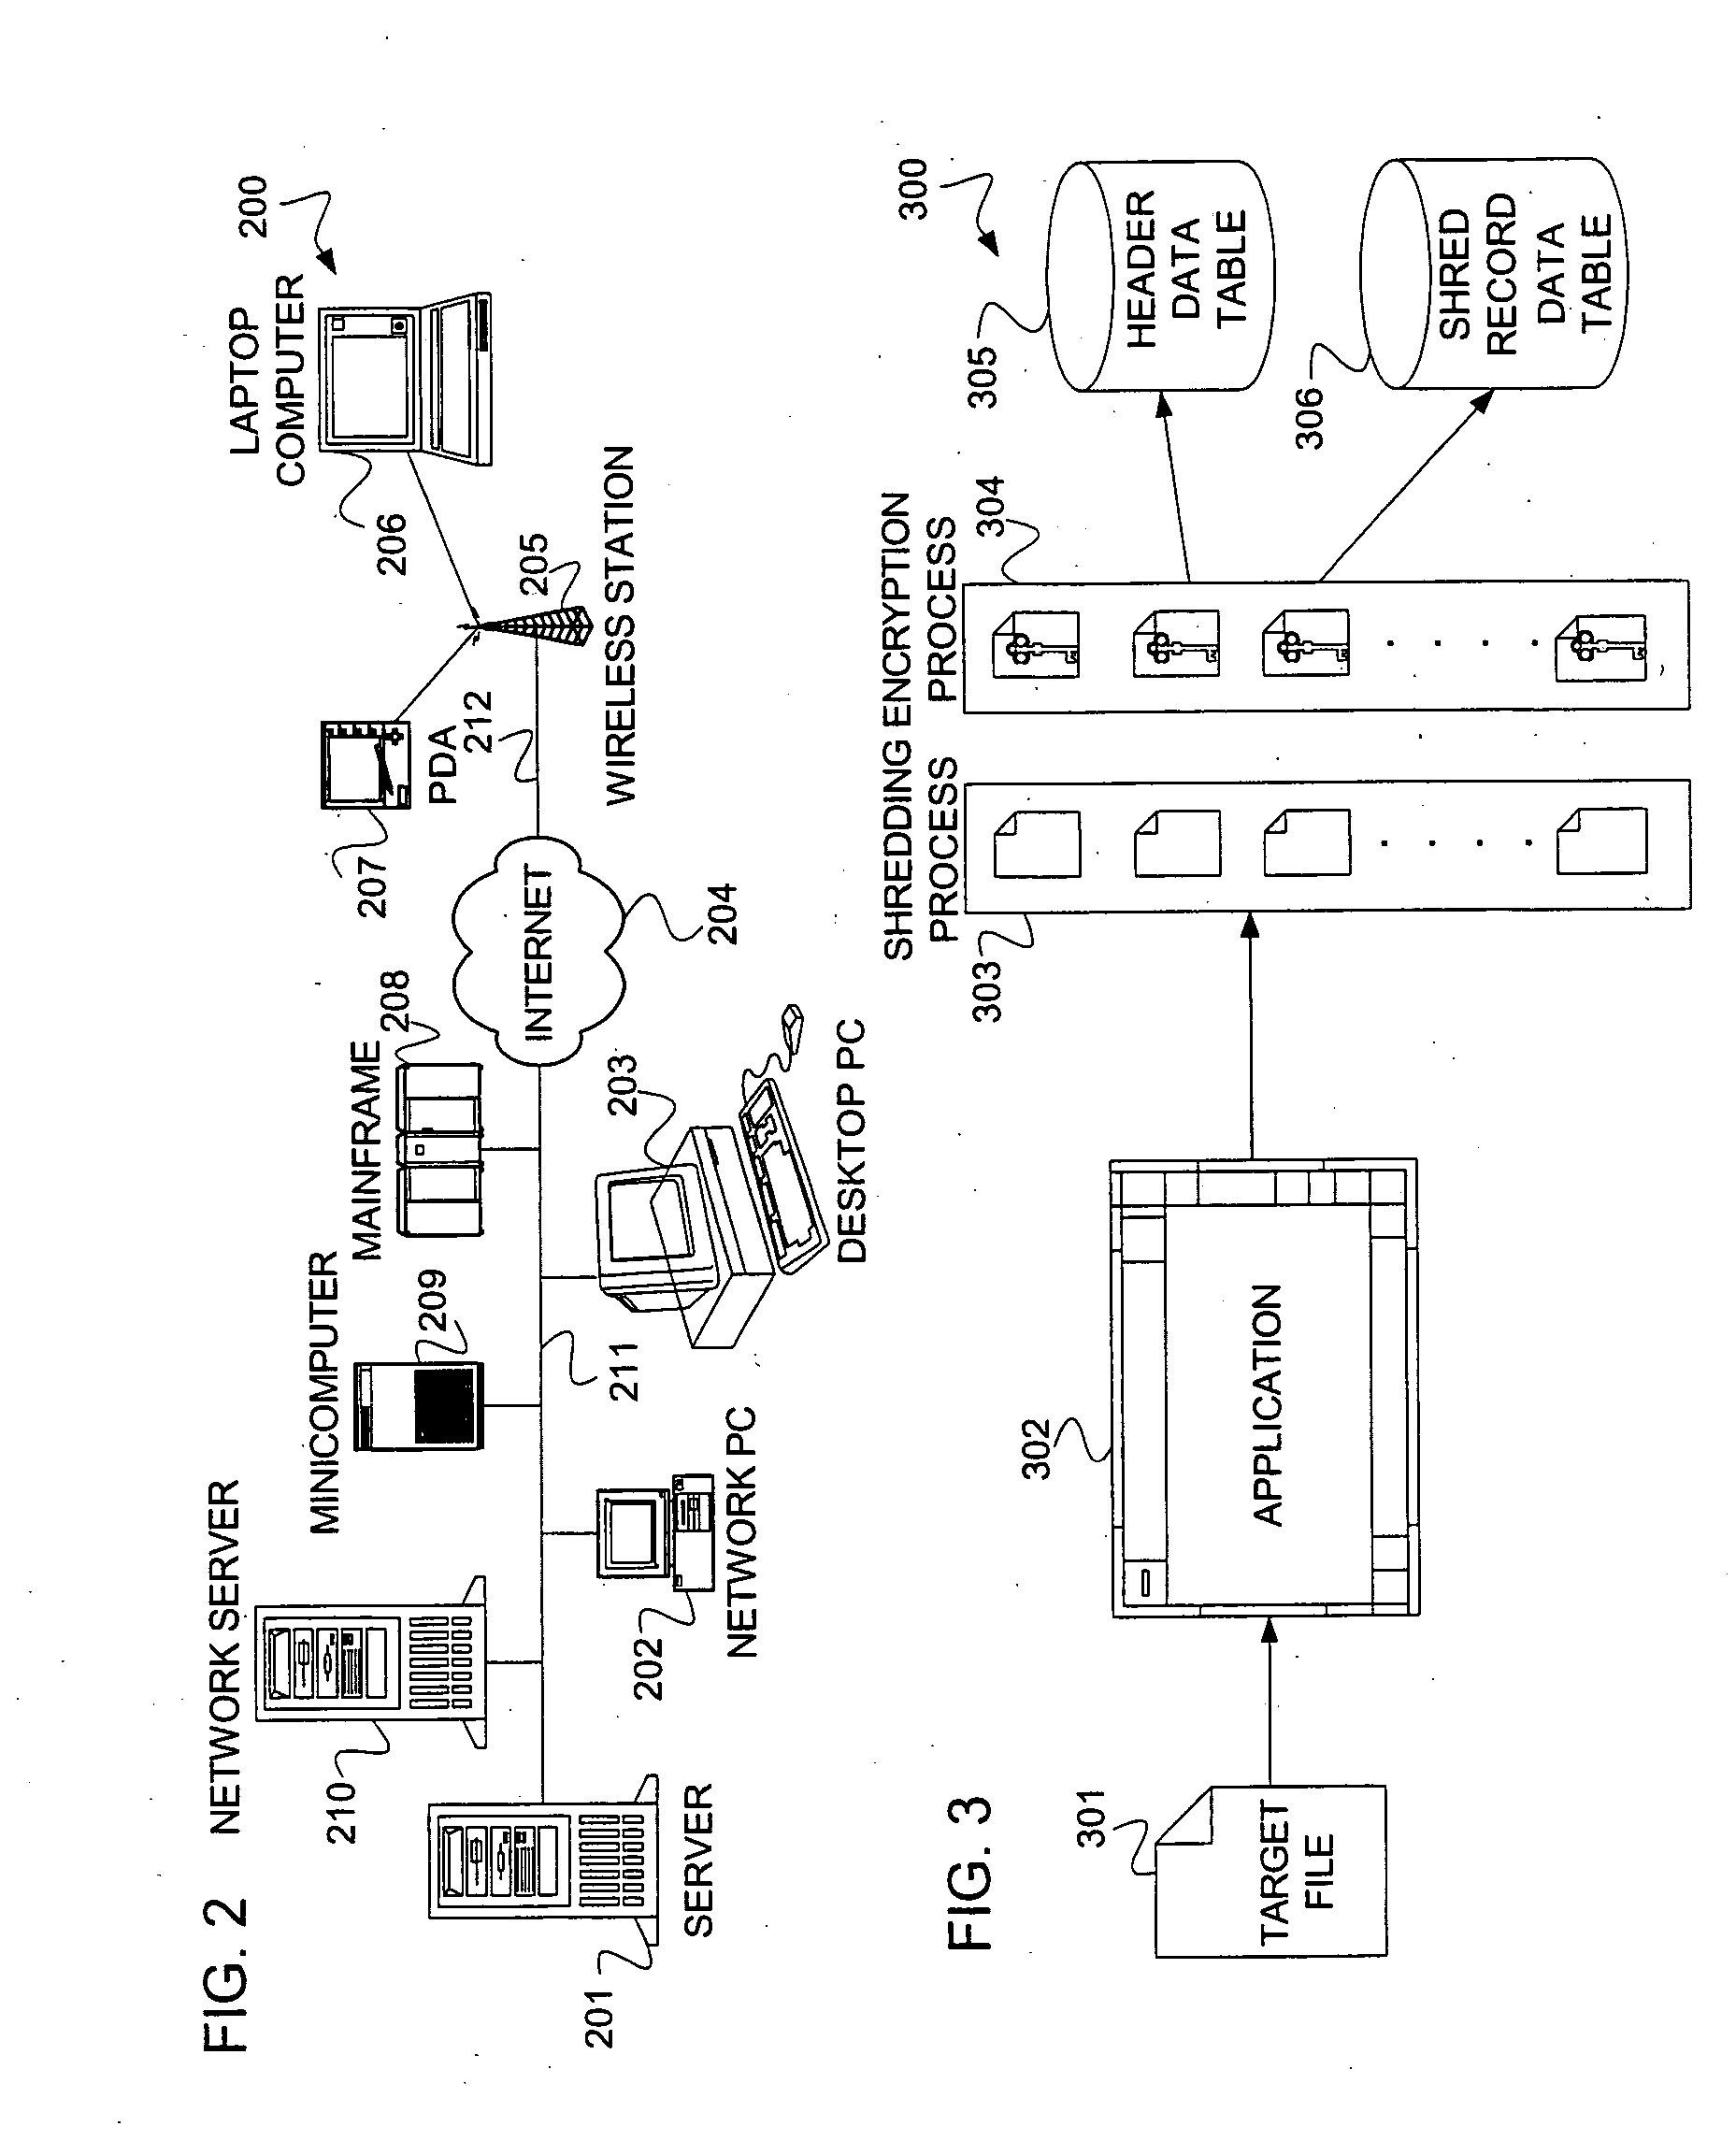 Apparatus and method for storing and distributing encrypted digital content